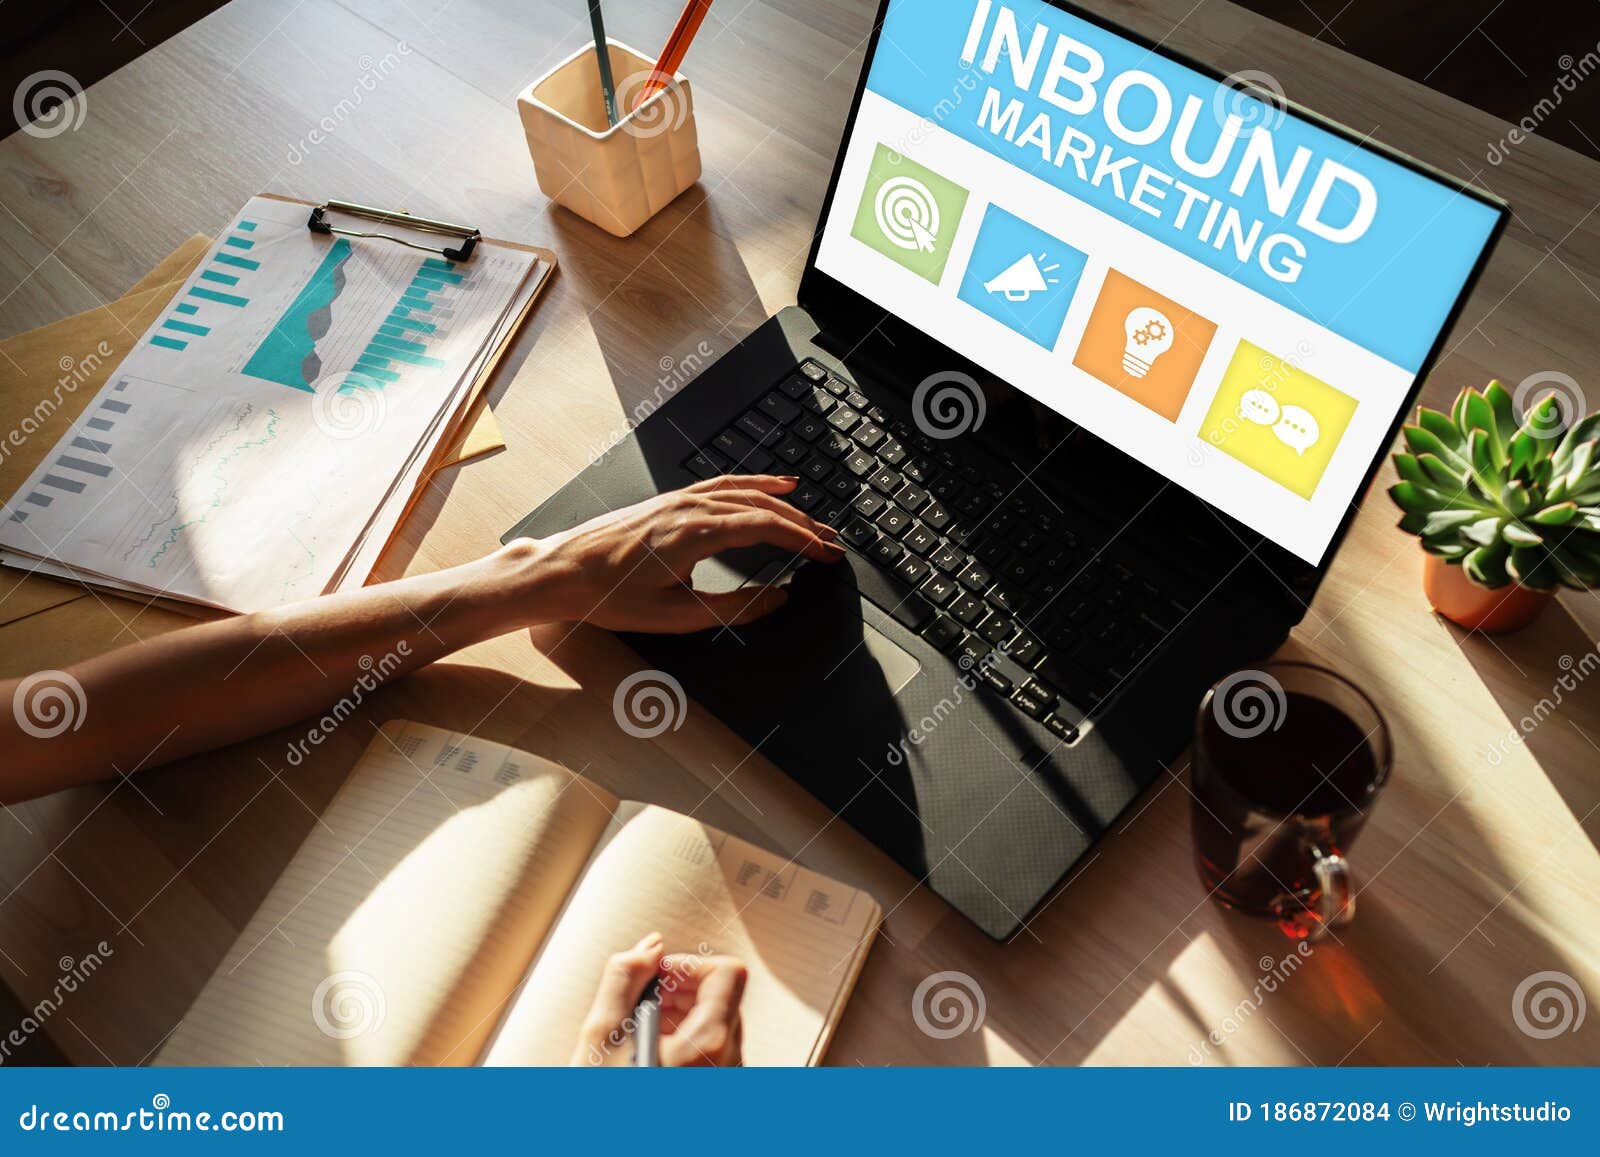 inbound marketing. content management and advertising strategy concept.